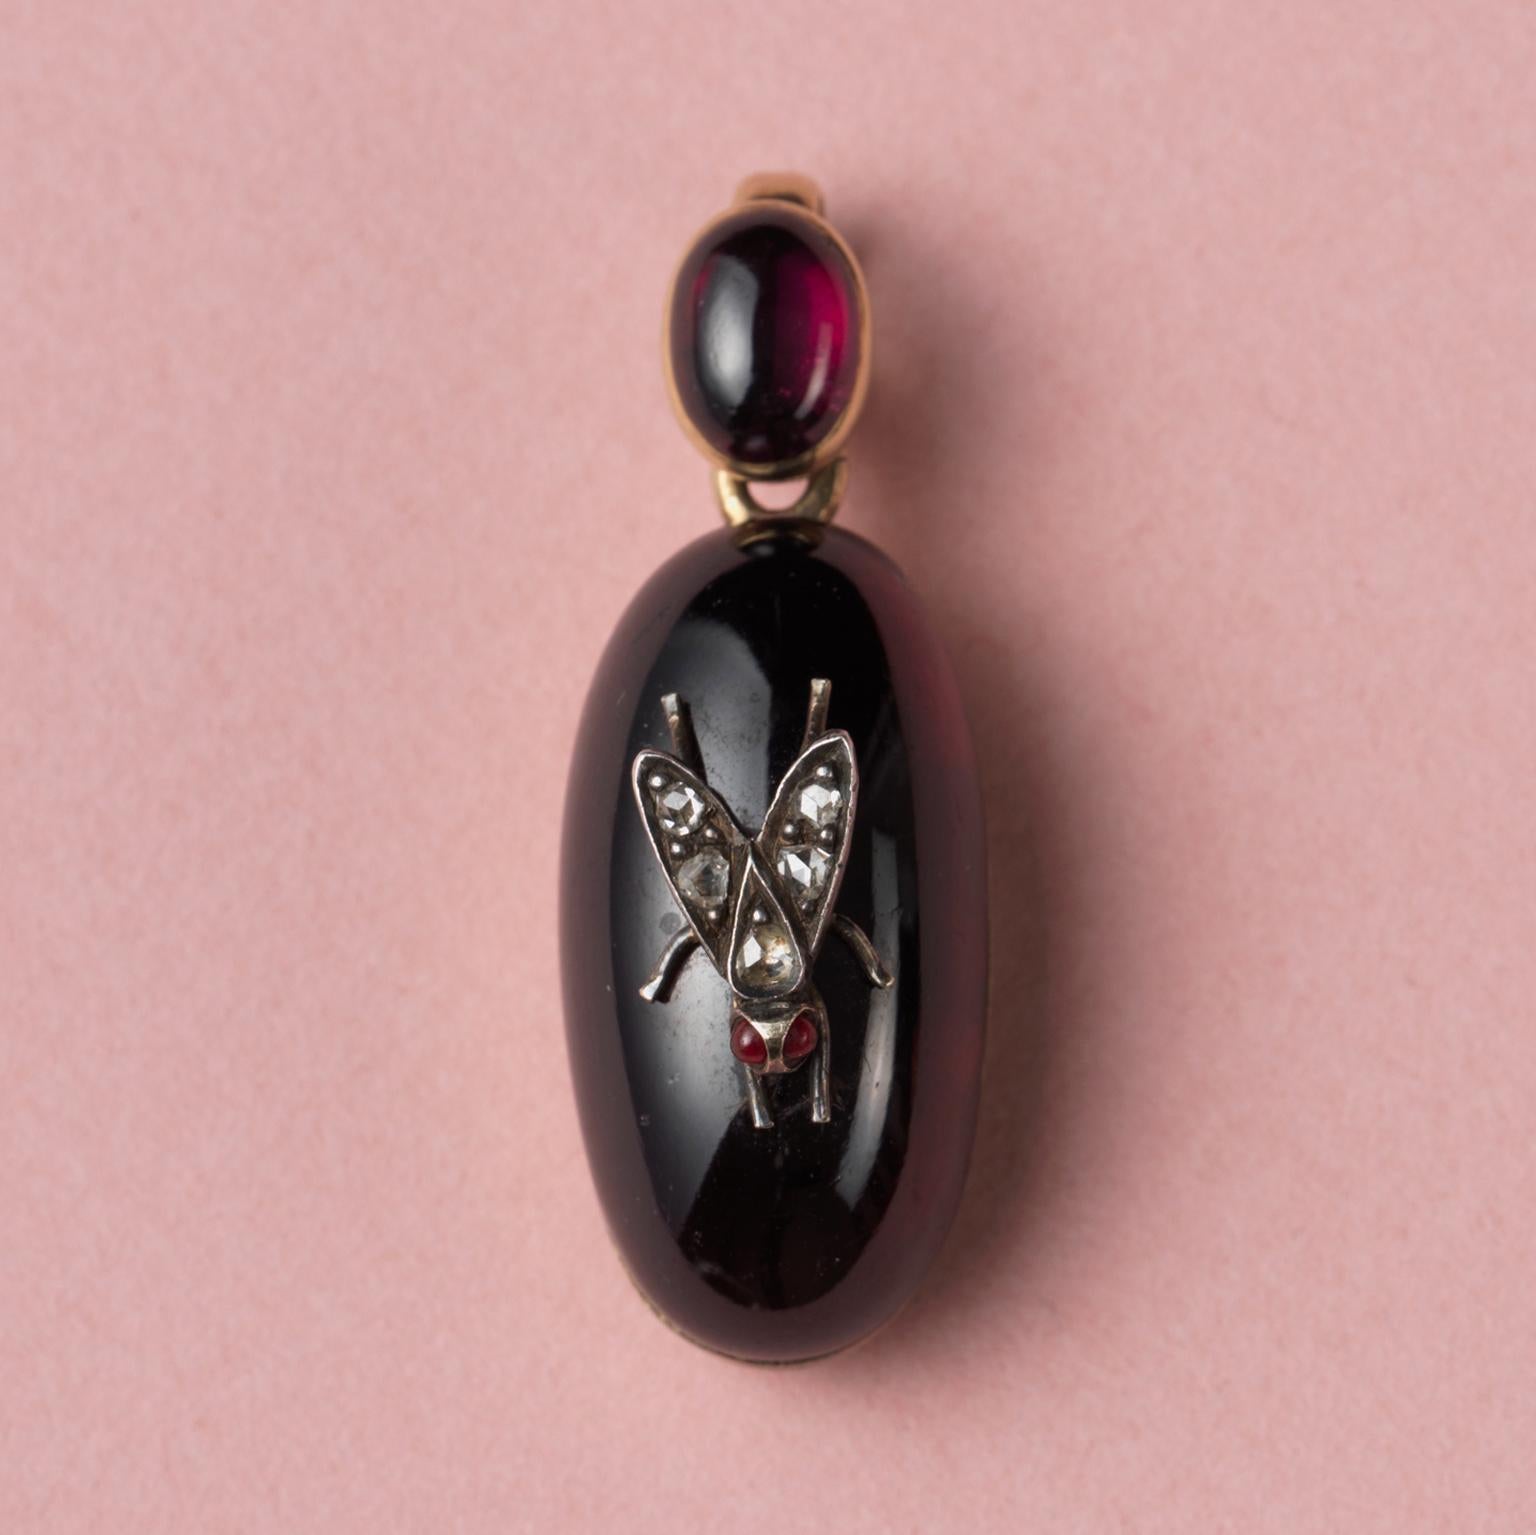 A 14-carat gold locket with a larger oval, cabochon-cut garnet decorated with a silver and diamond fly; the hoop is also set with a smaller cabochon-cut garnet, at the back is an oval locket with one glassed compartment. England, end 19th